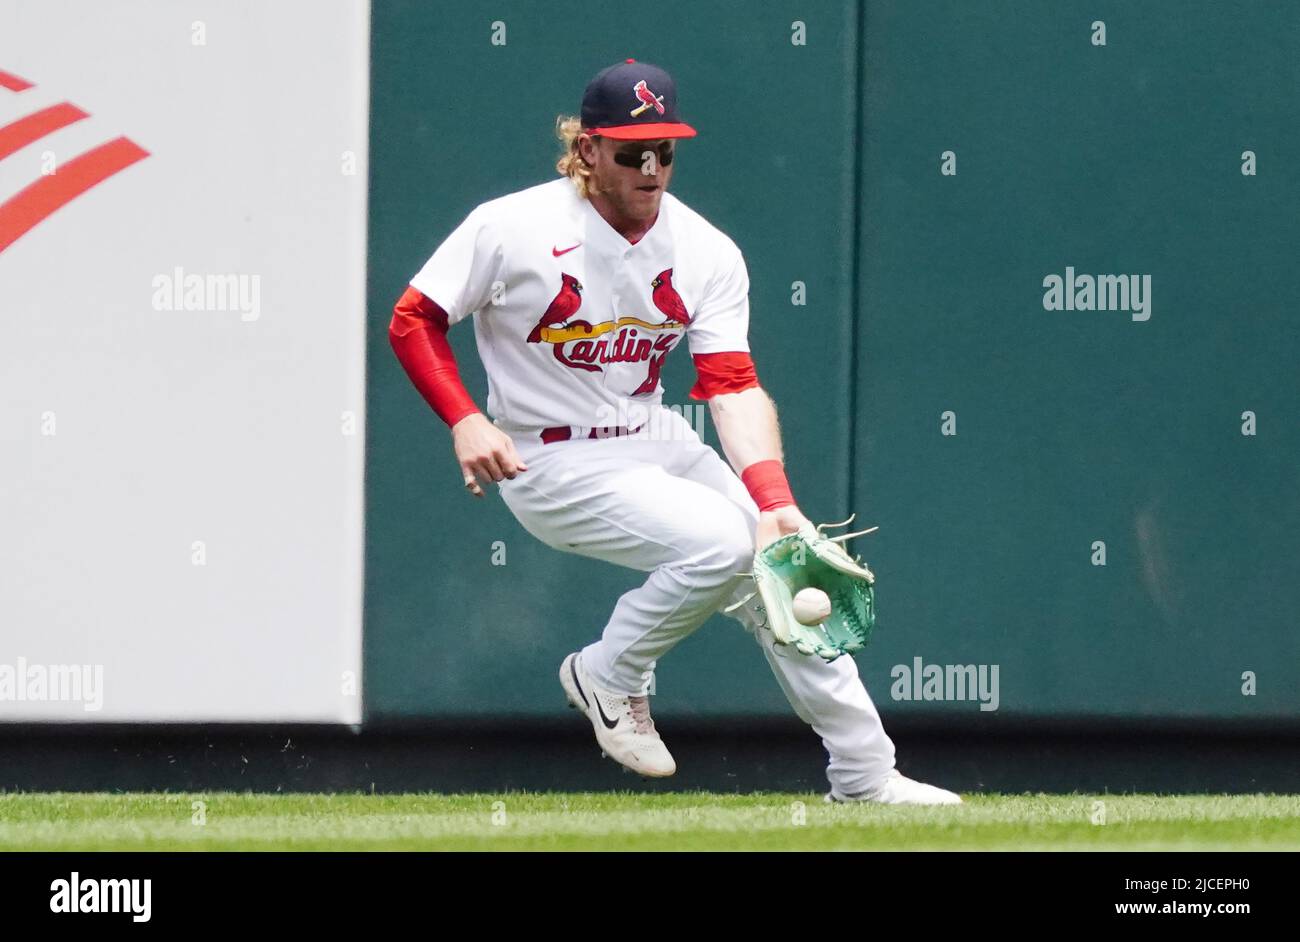 St. Louis, United States. 12th June, 2022. St. Louis Cardinals Harrison Bader fields a ball in center field off the bat of Cincinnati Reds Brandon Drury in the fourth inning at Busch Stadium in St. Louis on Sunday, June 12, 2022. Photo by Bill Greenblatt/UPI Credit: UPI/Alamy Live News Stock Photo